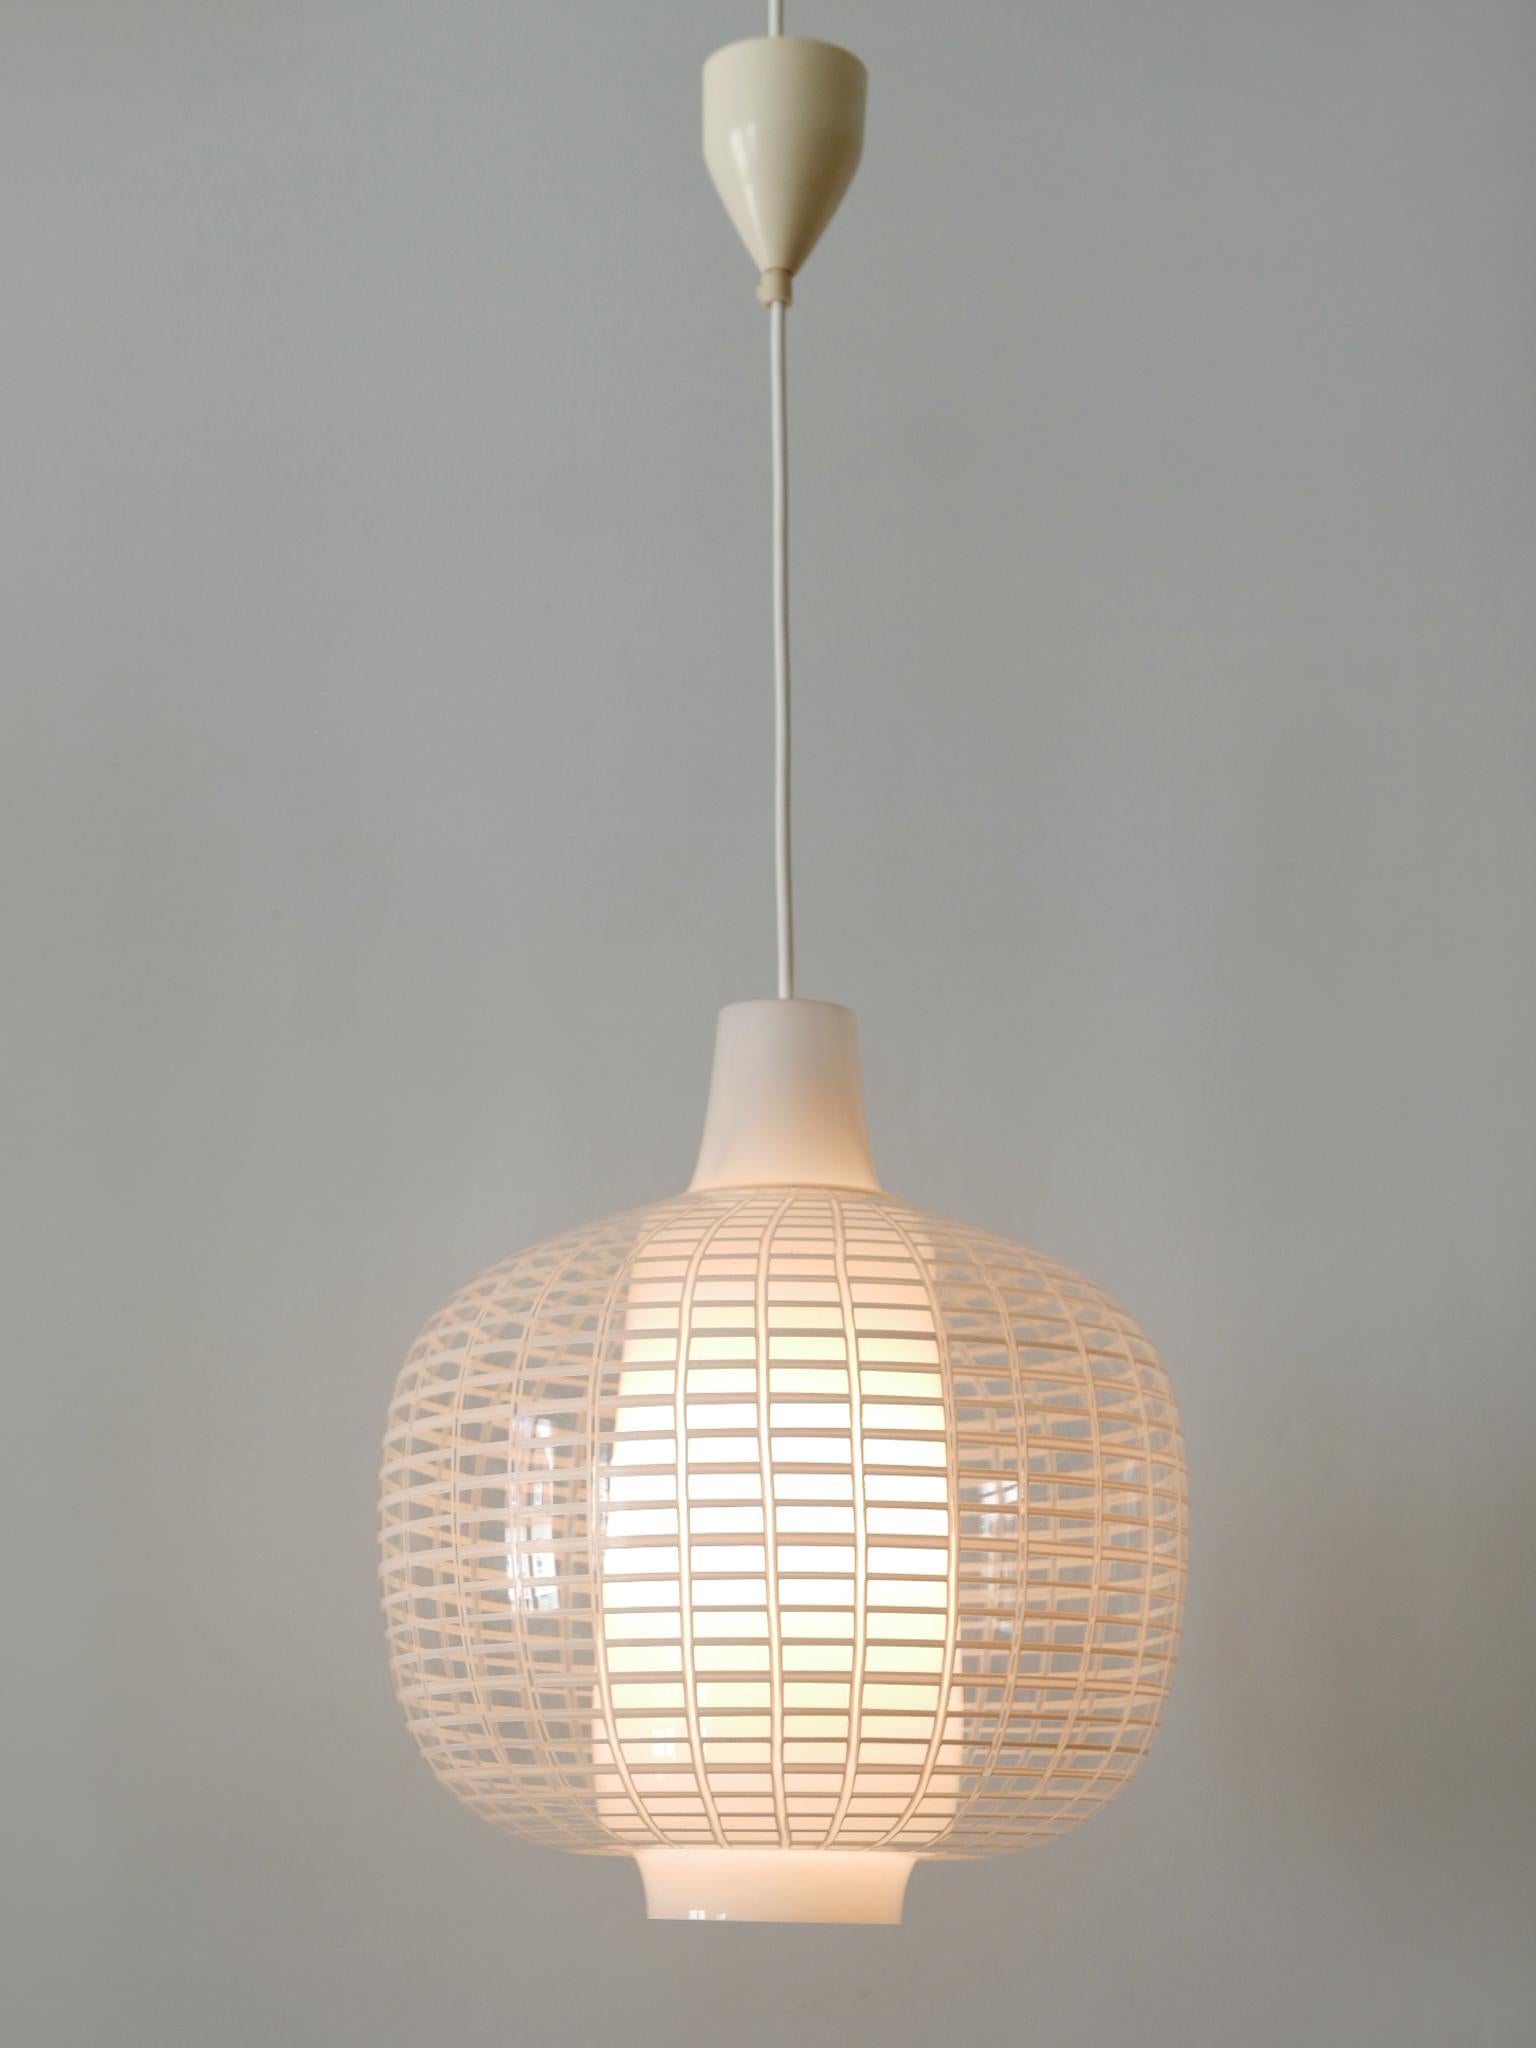 Etched Rare Mid-Century Modern Pendant Lamp Nervi by Aloys Ferdinand Gangkofner, 1950s For Sale